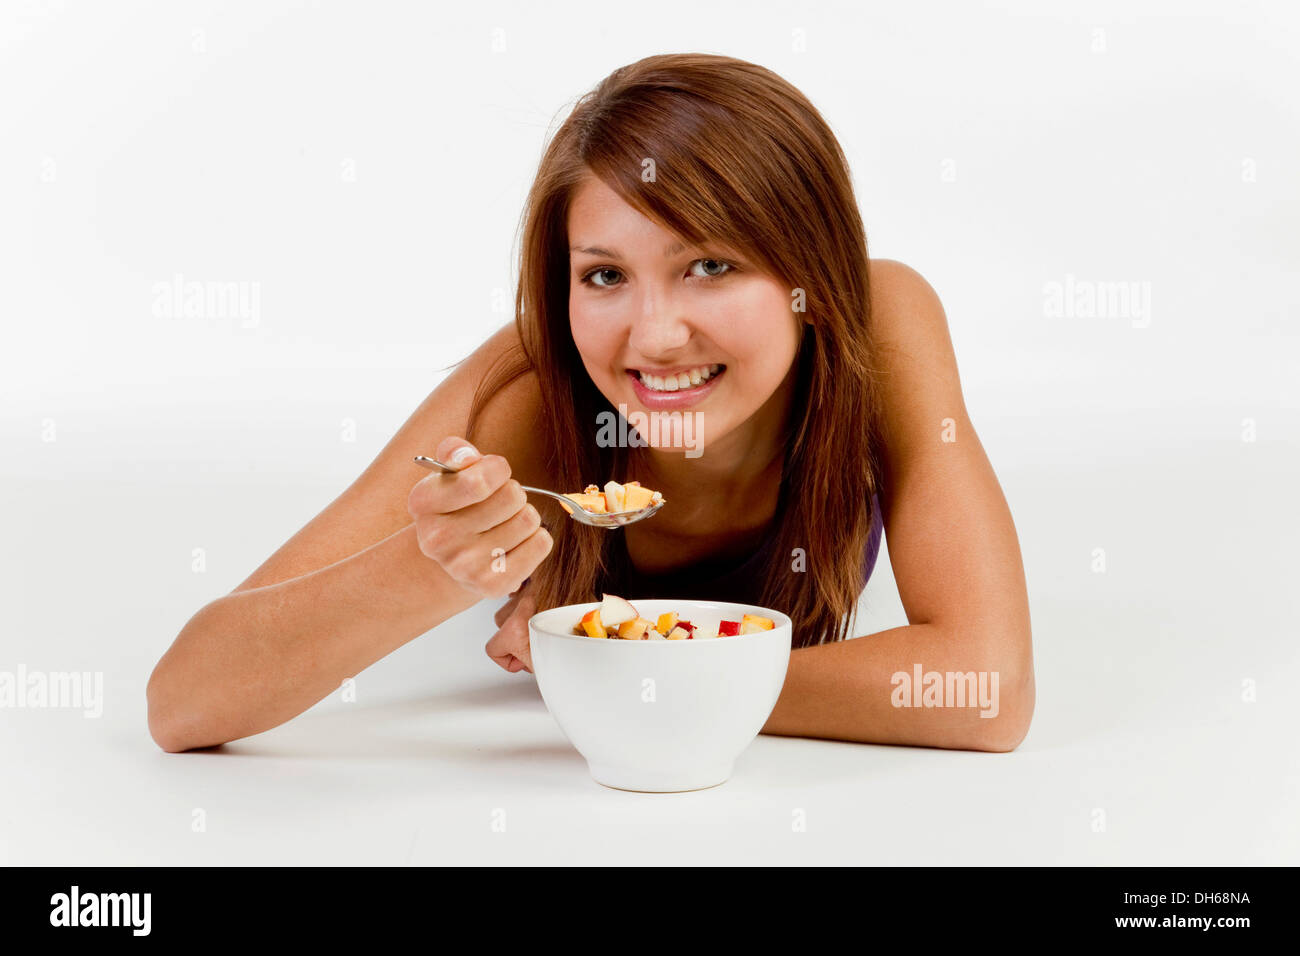 Young woman with a bowl of cereal Stock Photo